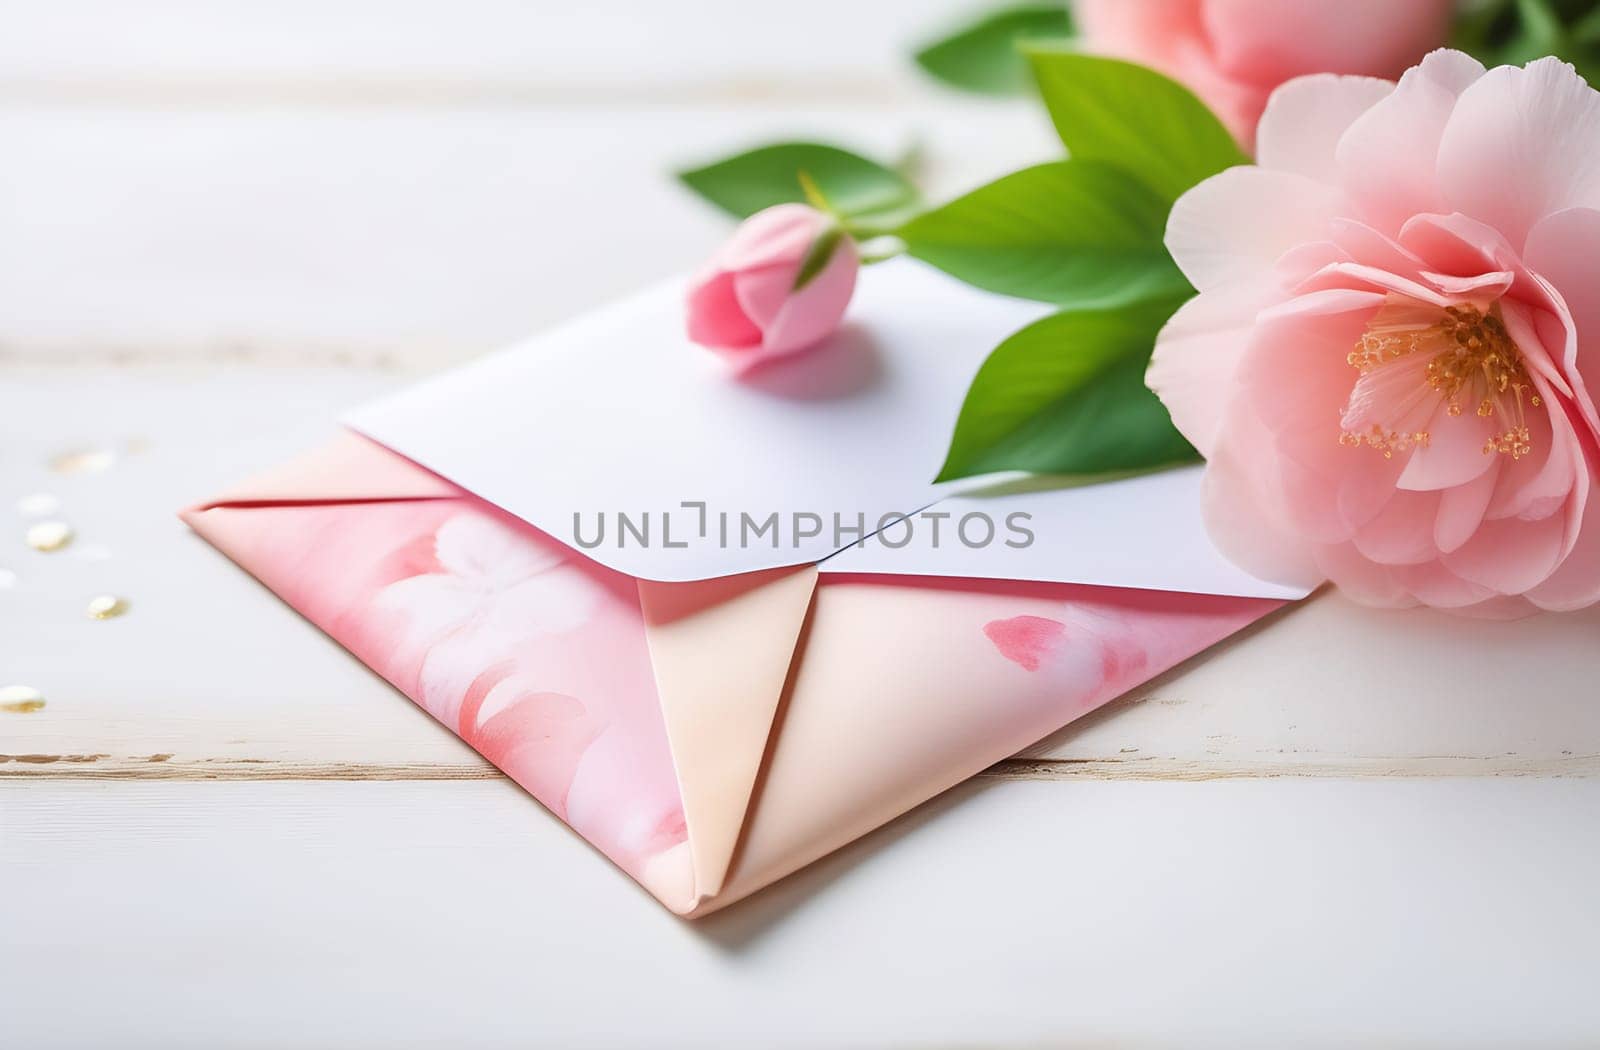 A light envelope with flowers for a festive spring greeting card. Romantic birthday background by claire_lucia